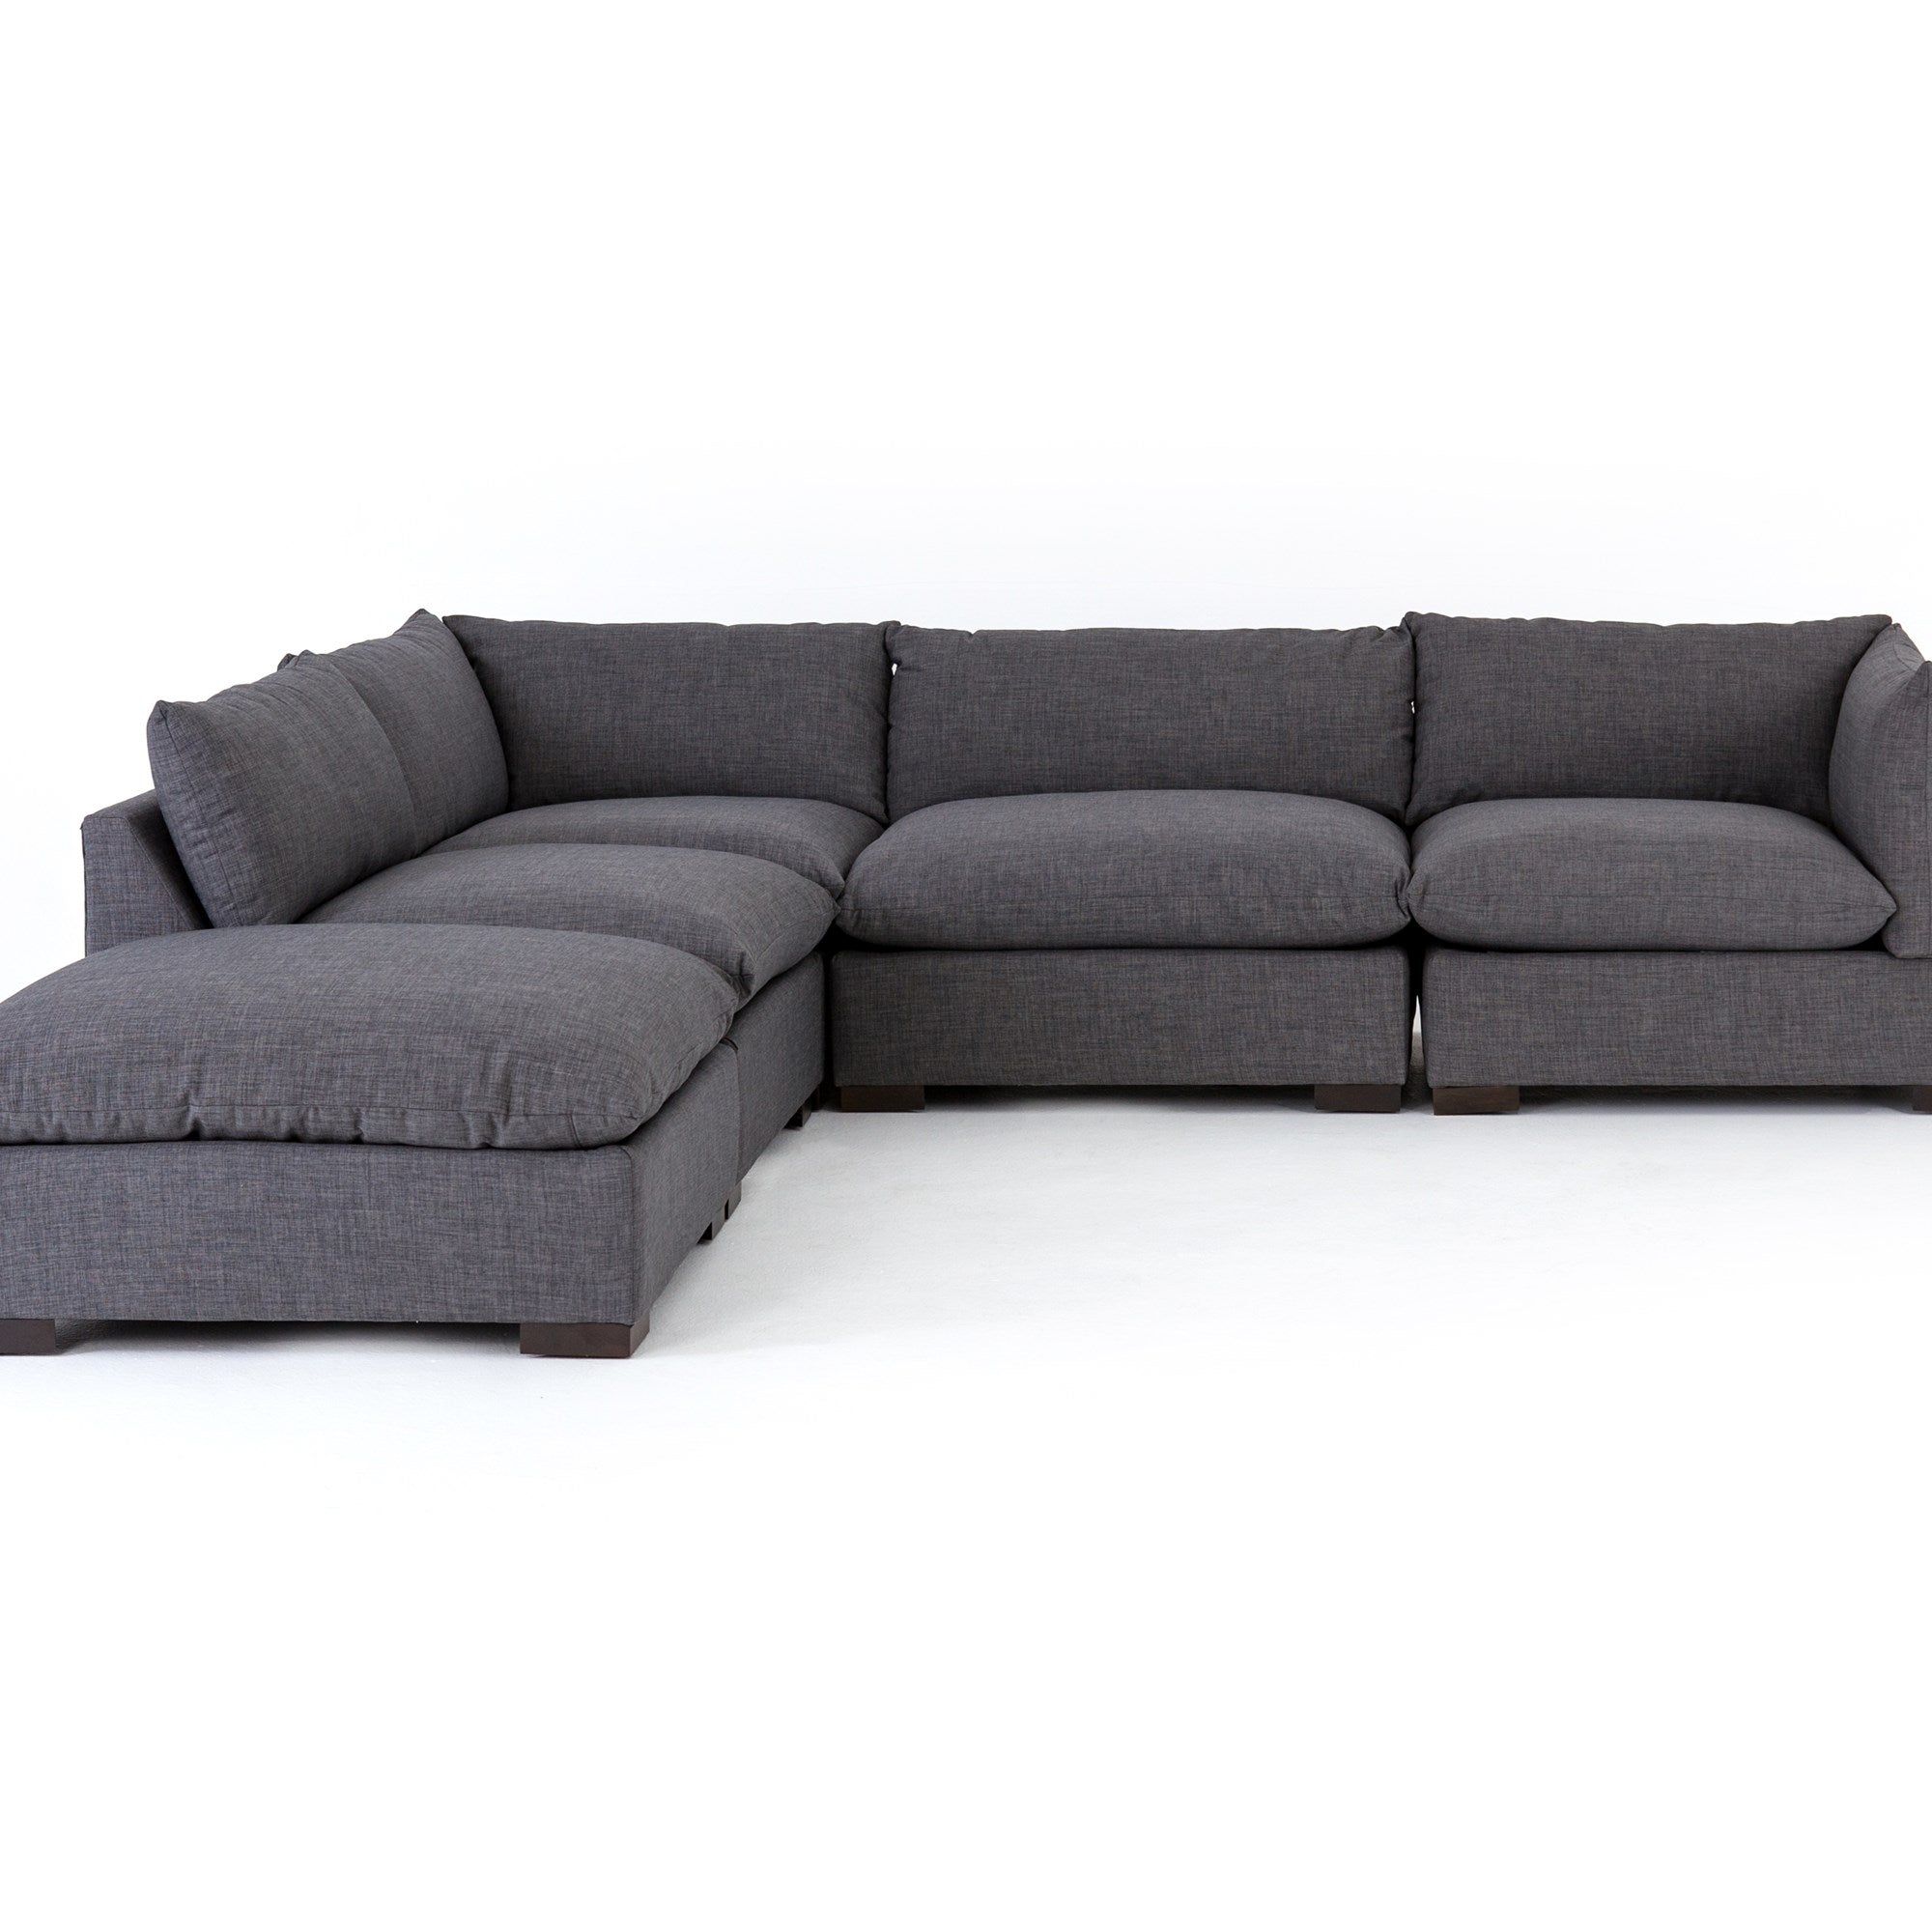 Westwood 4 Piece Sectional with Ottoman